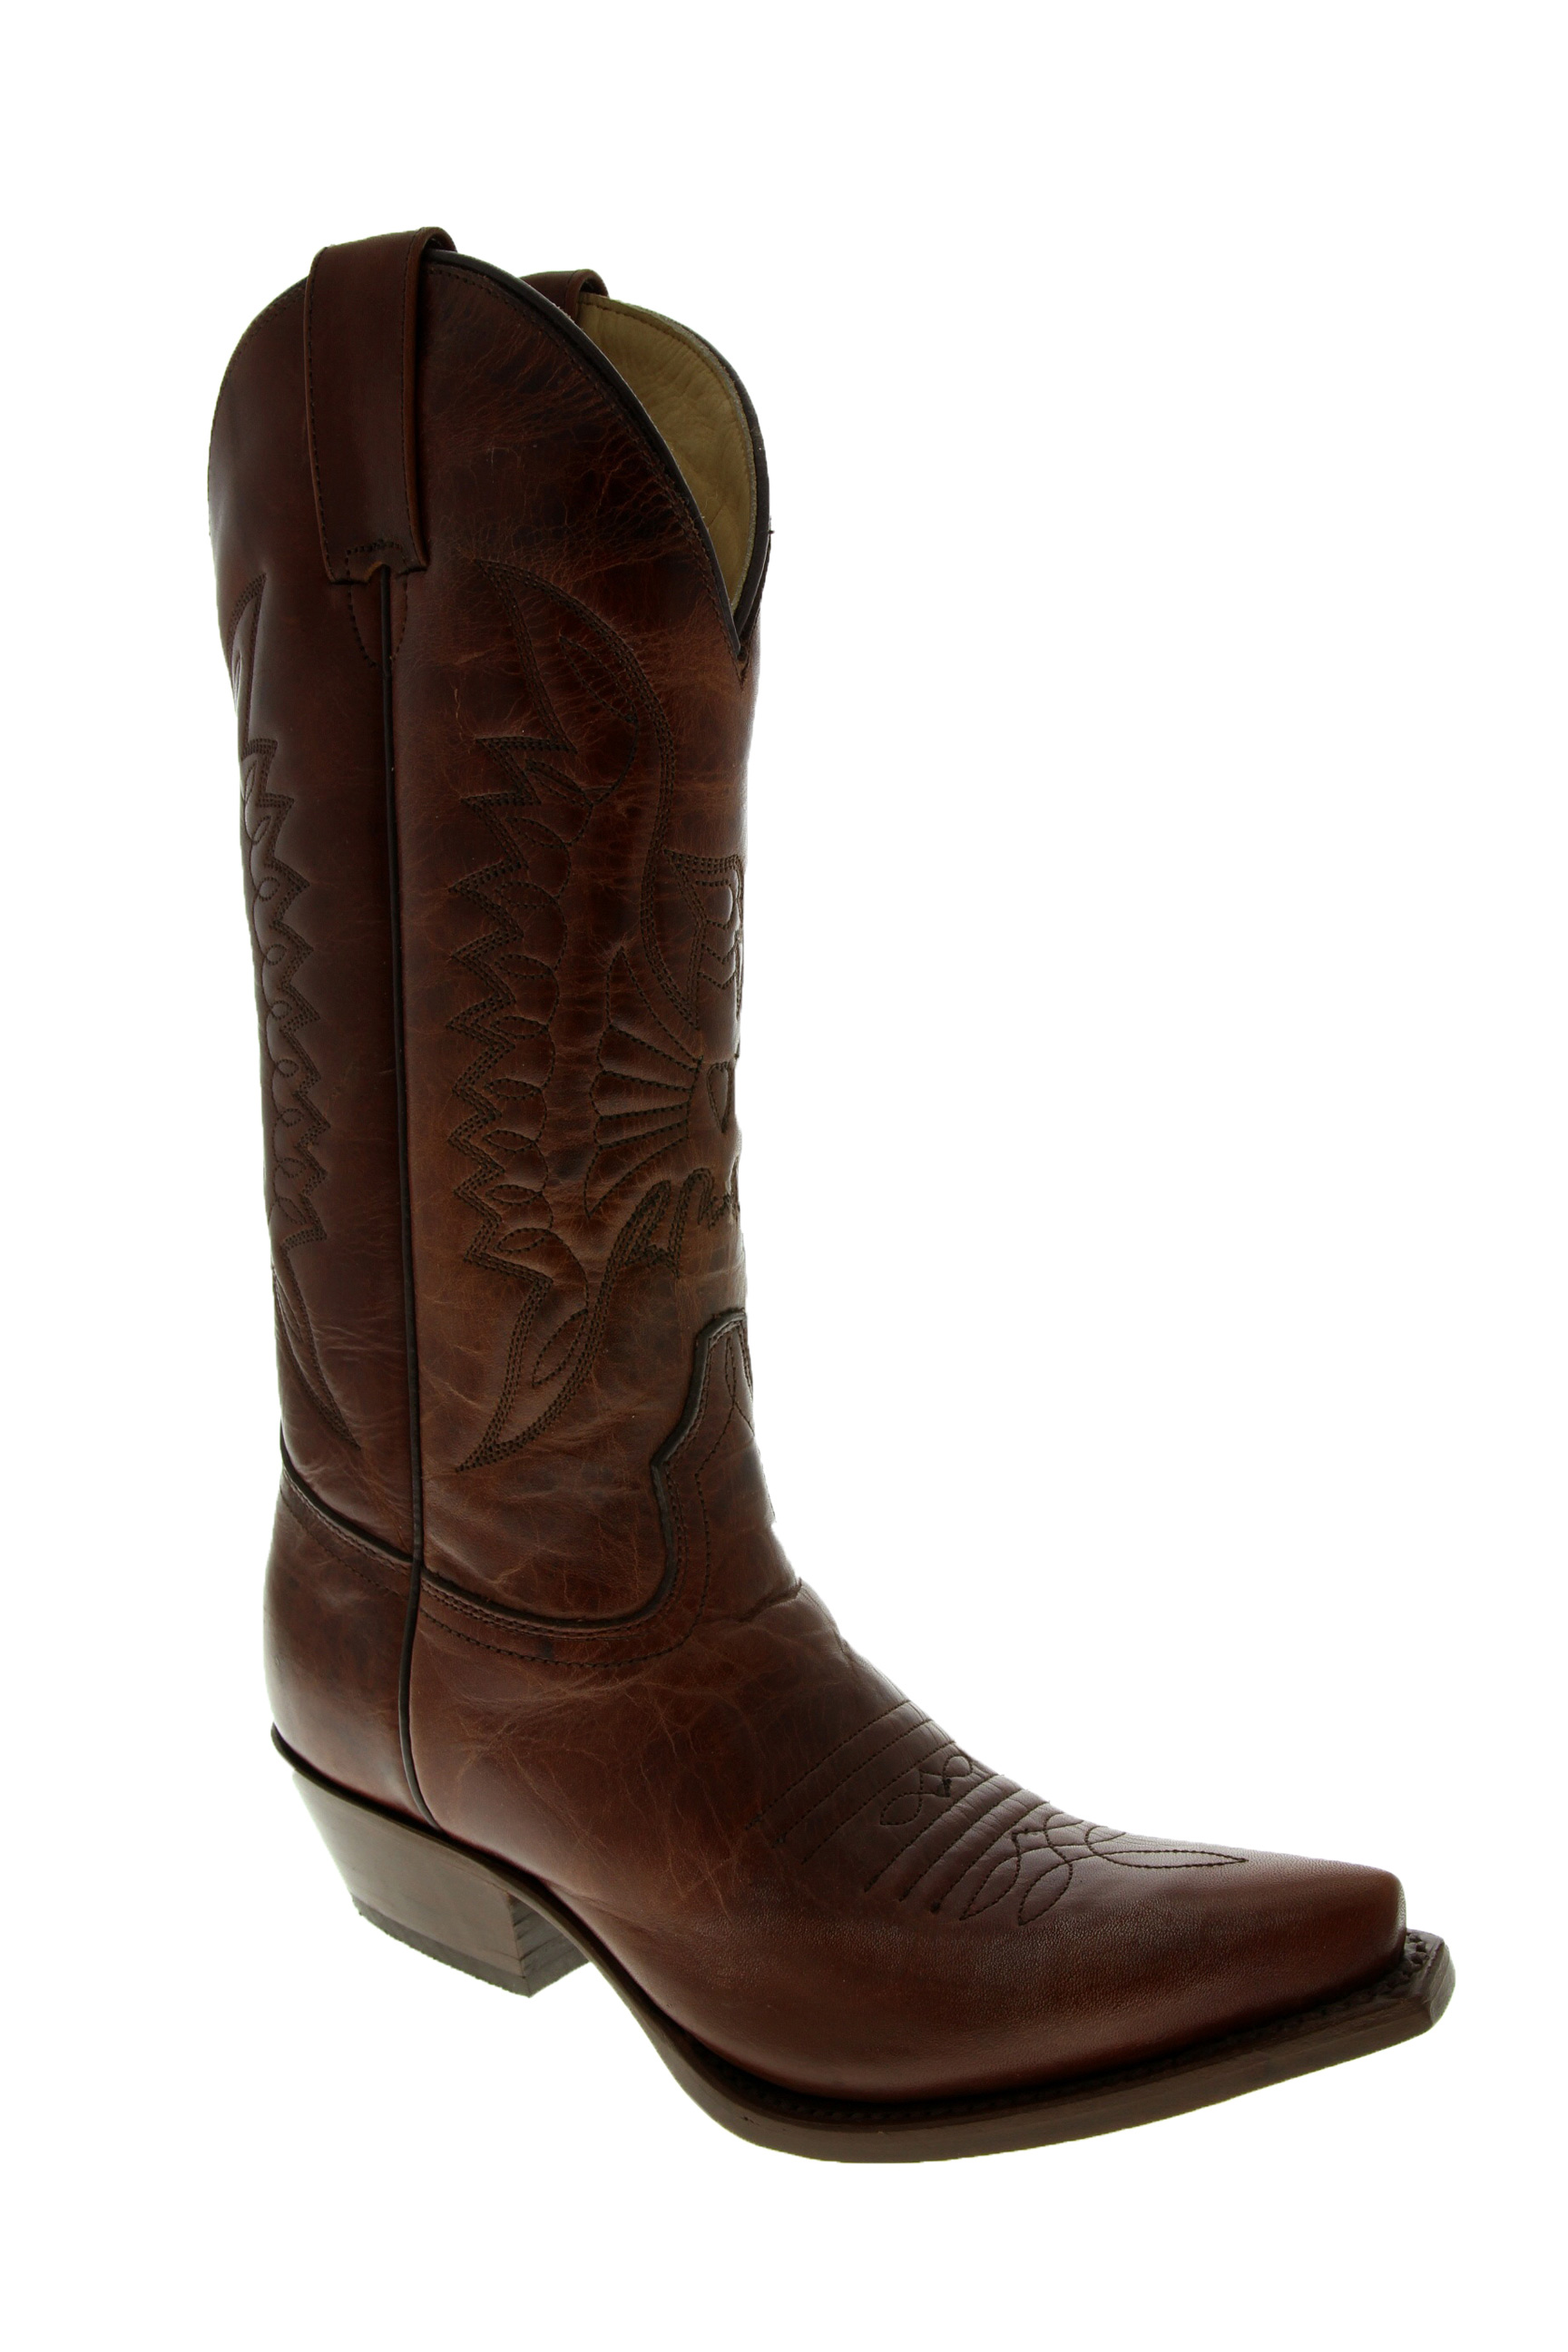 mexicana boots soldes - boots mexicana femme soldes